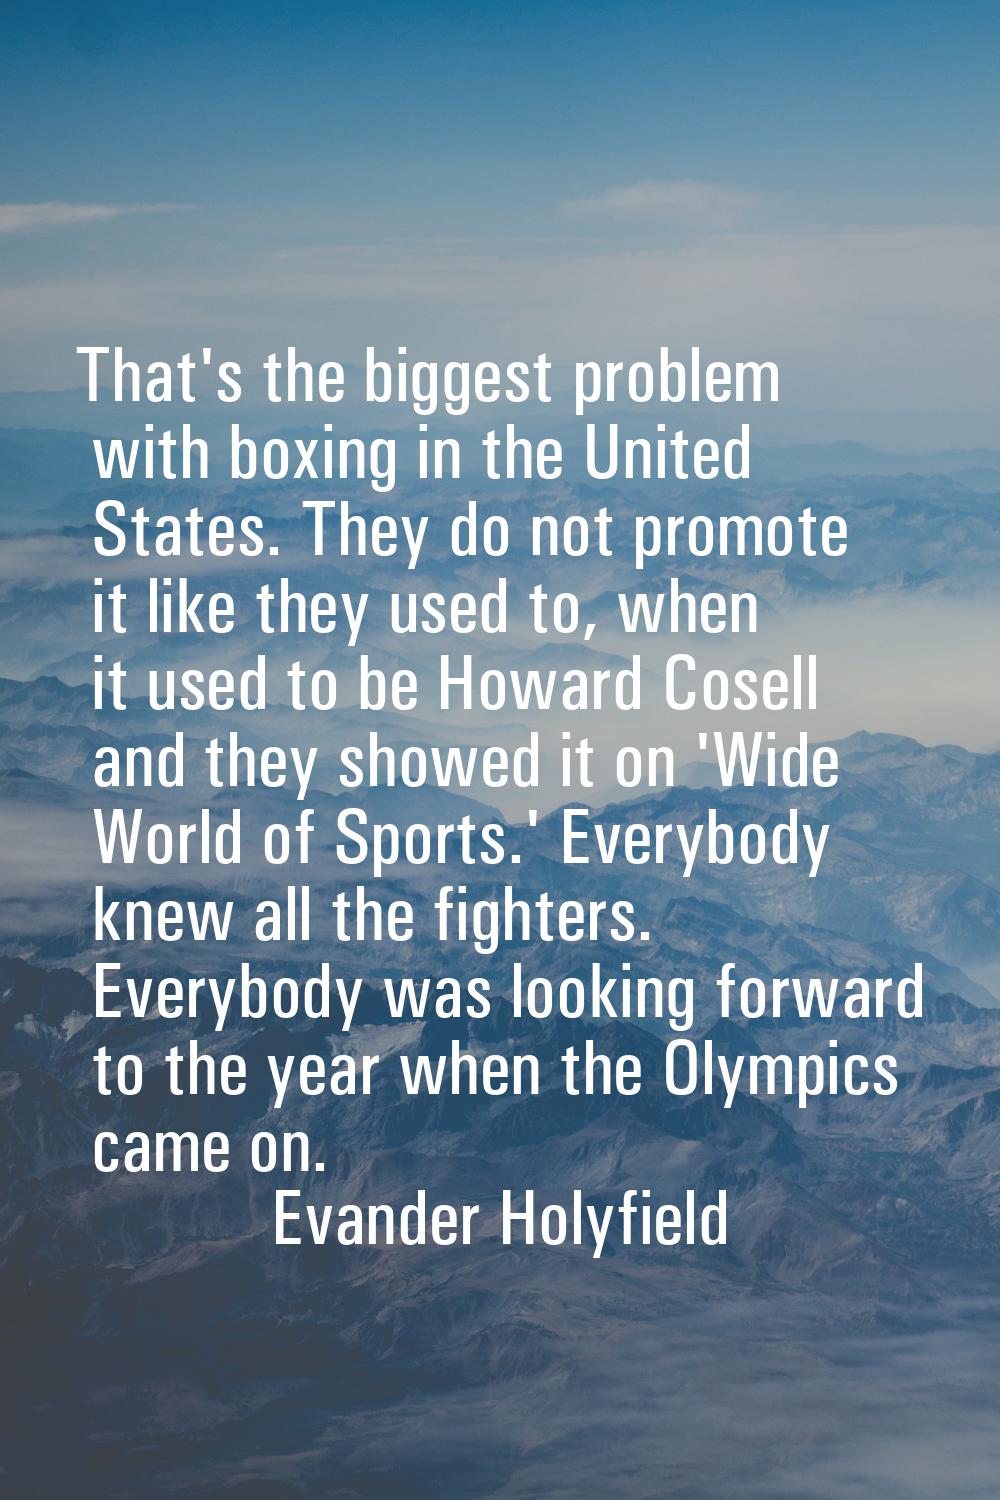 That's the biggest problem with boxing in the United States. They do not promote it like they used 